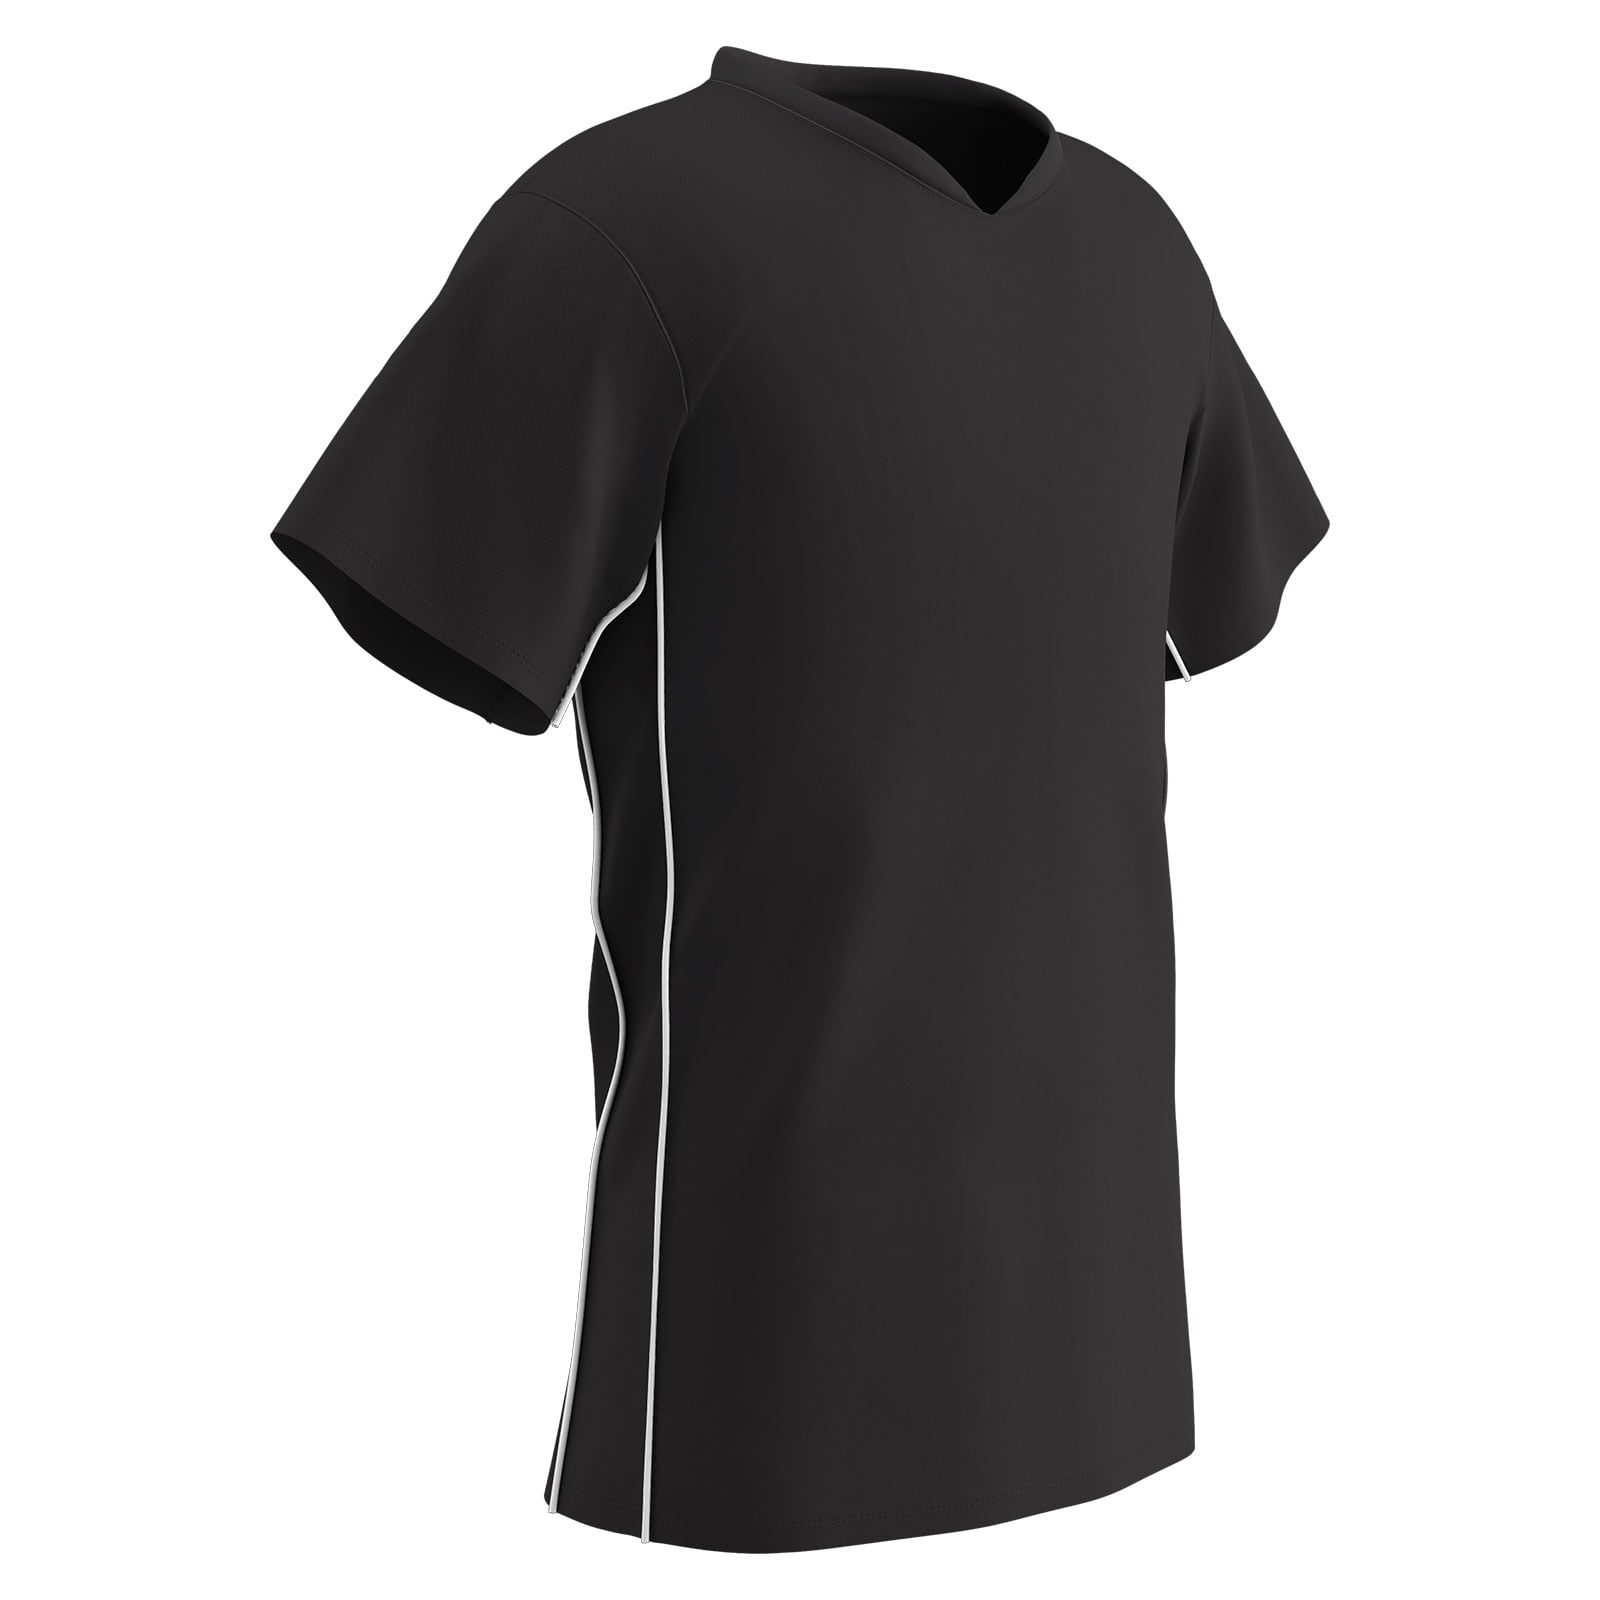 Champro Sports Field Goal Tee With Header Card 1" Black for sale online 